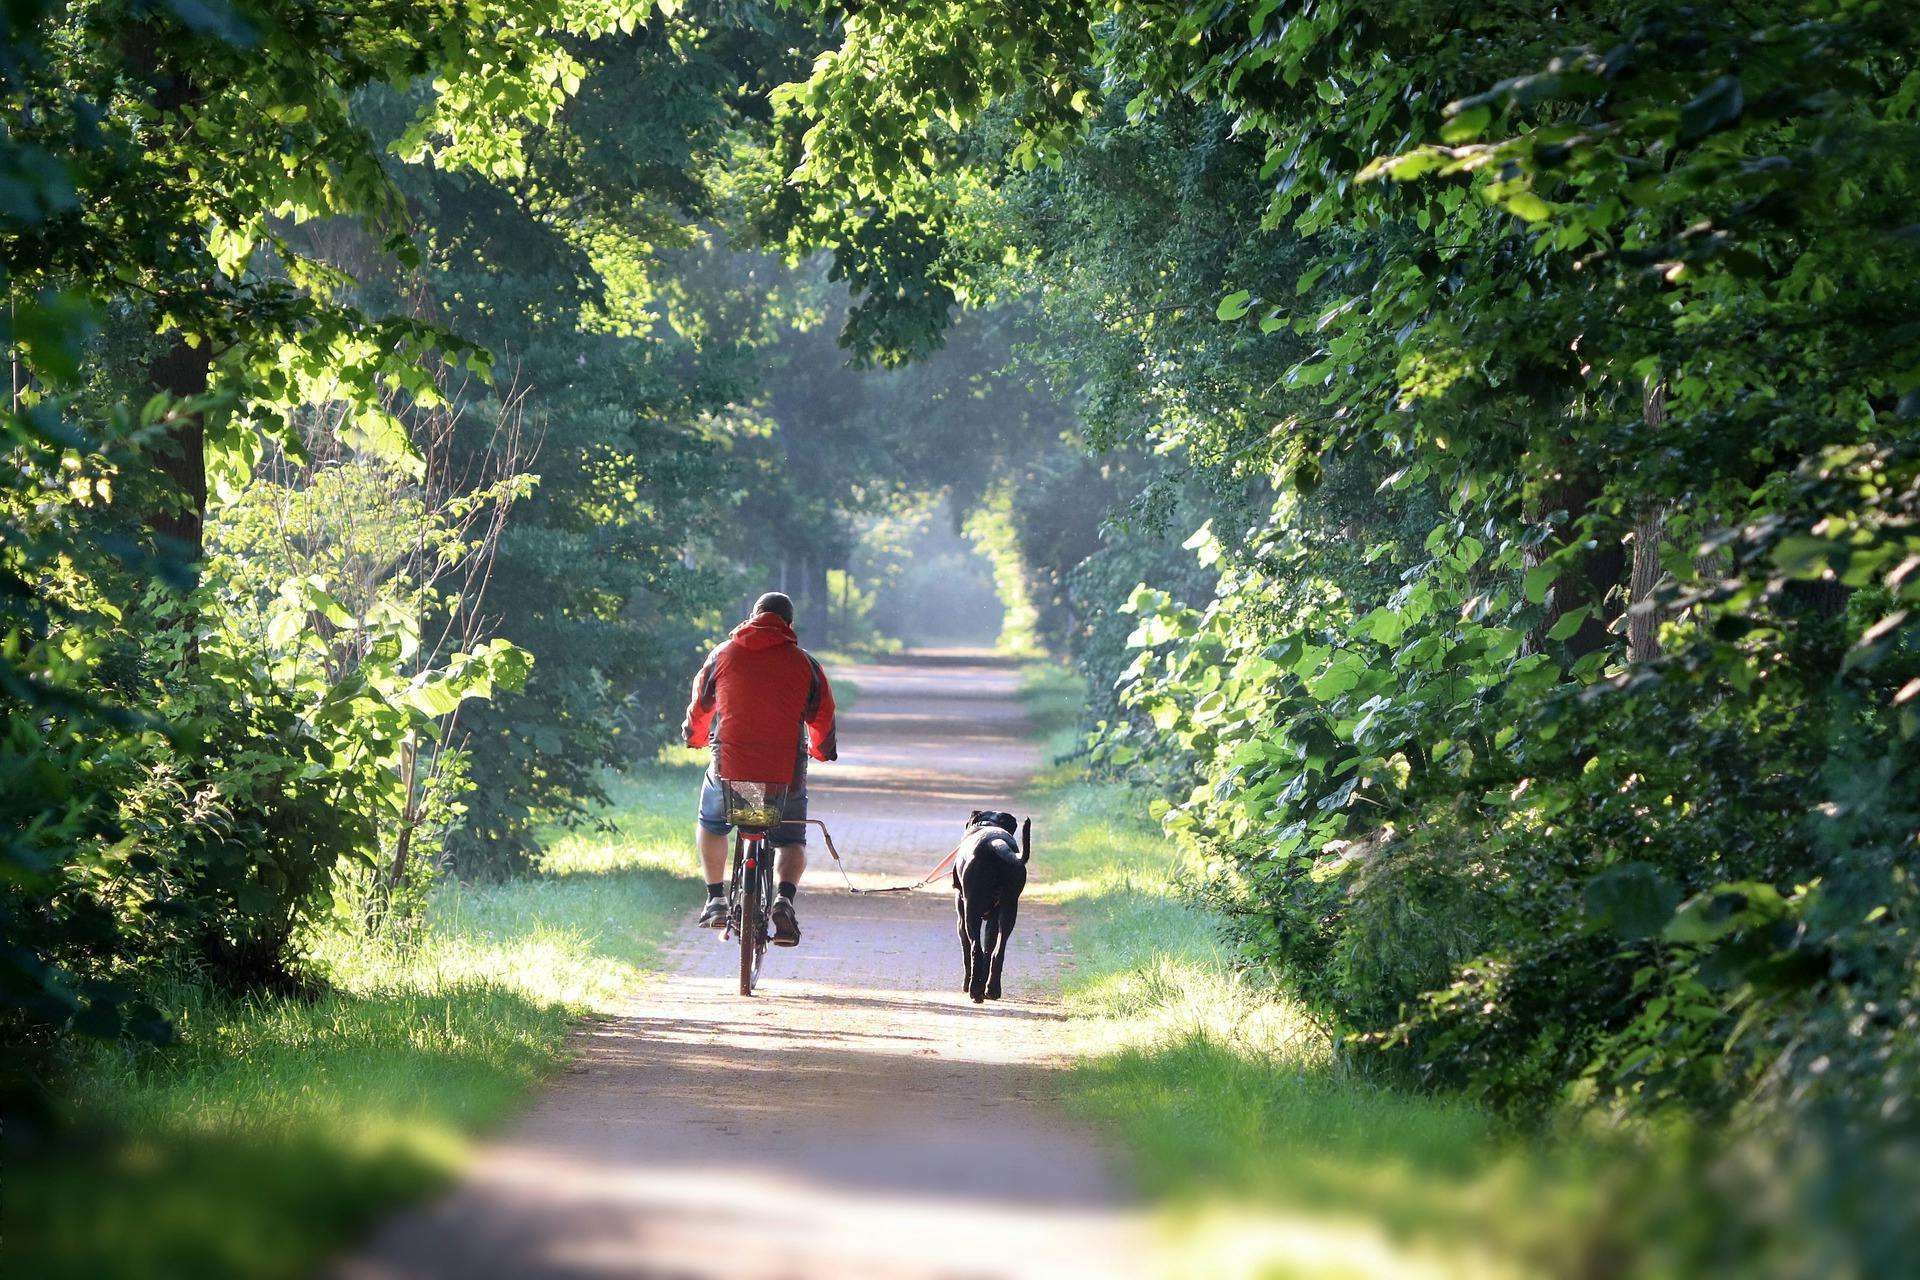 Main rides bike down a trail with dog next to him